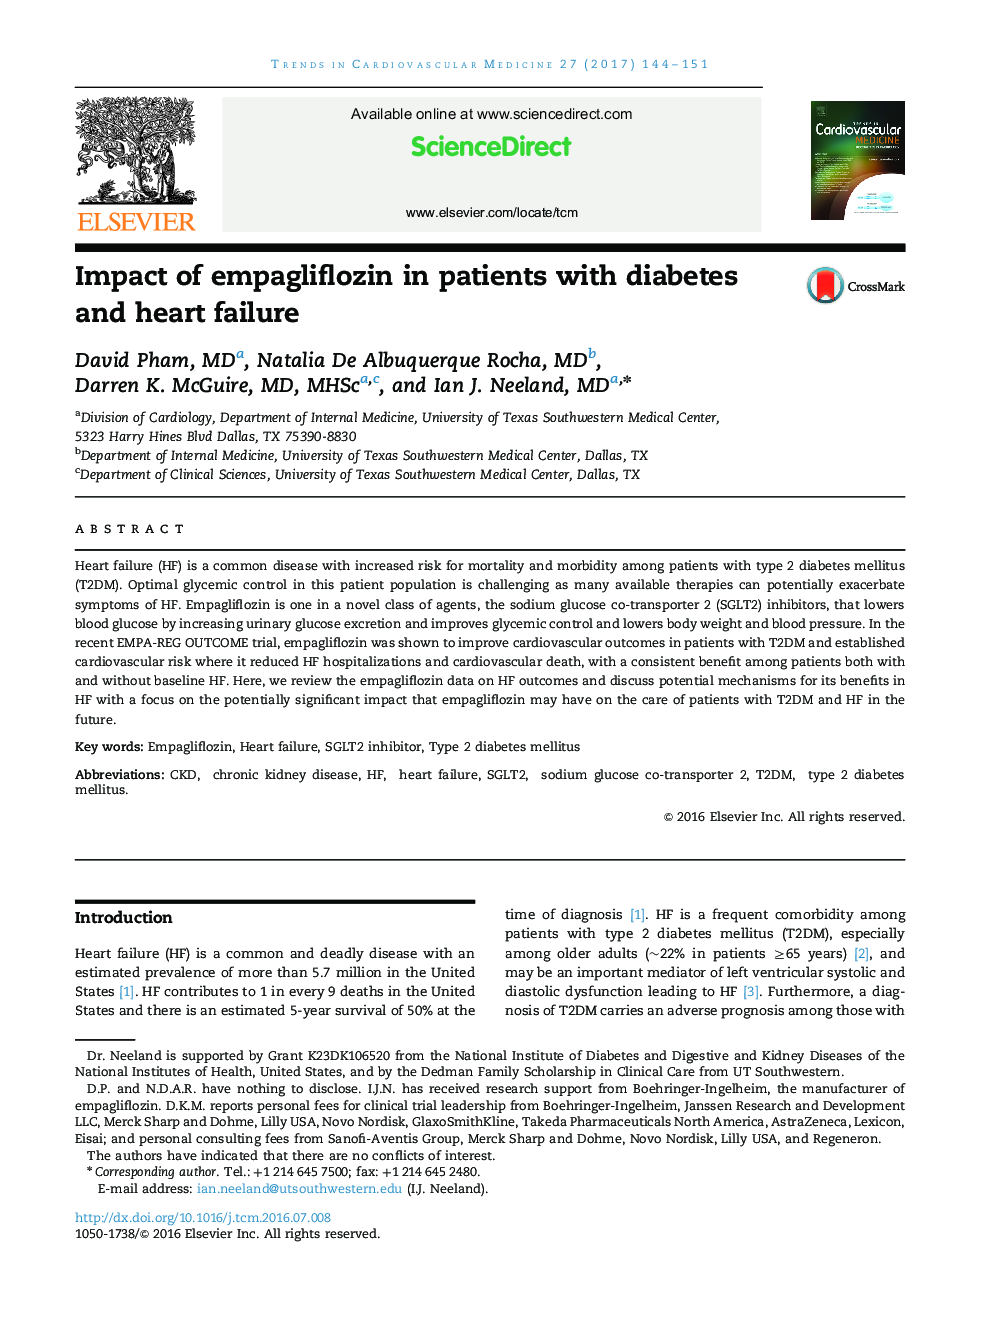 Impact of empagliflozin in patients with diabetes and heart failure